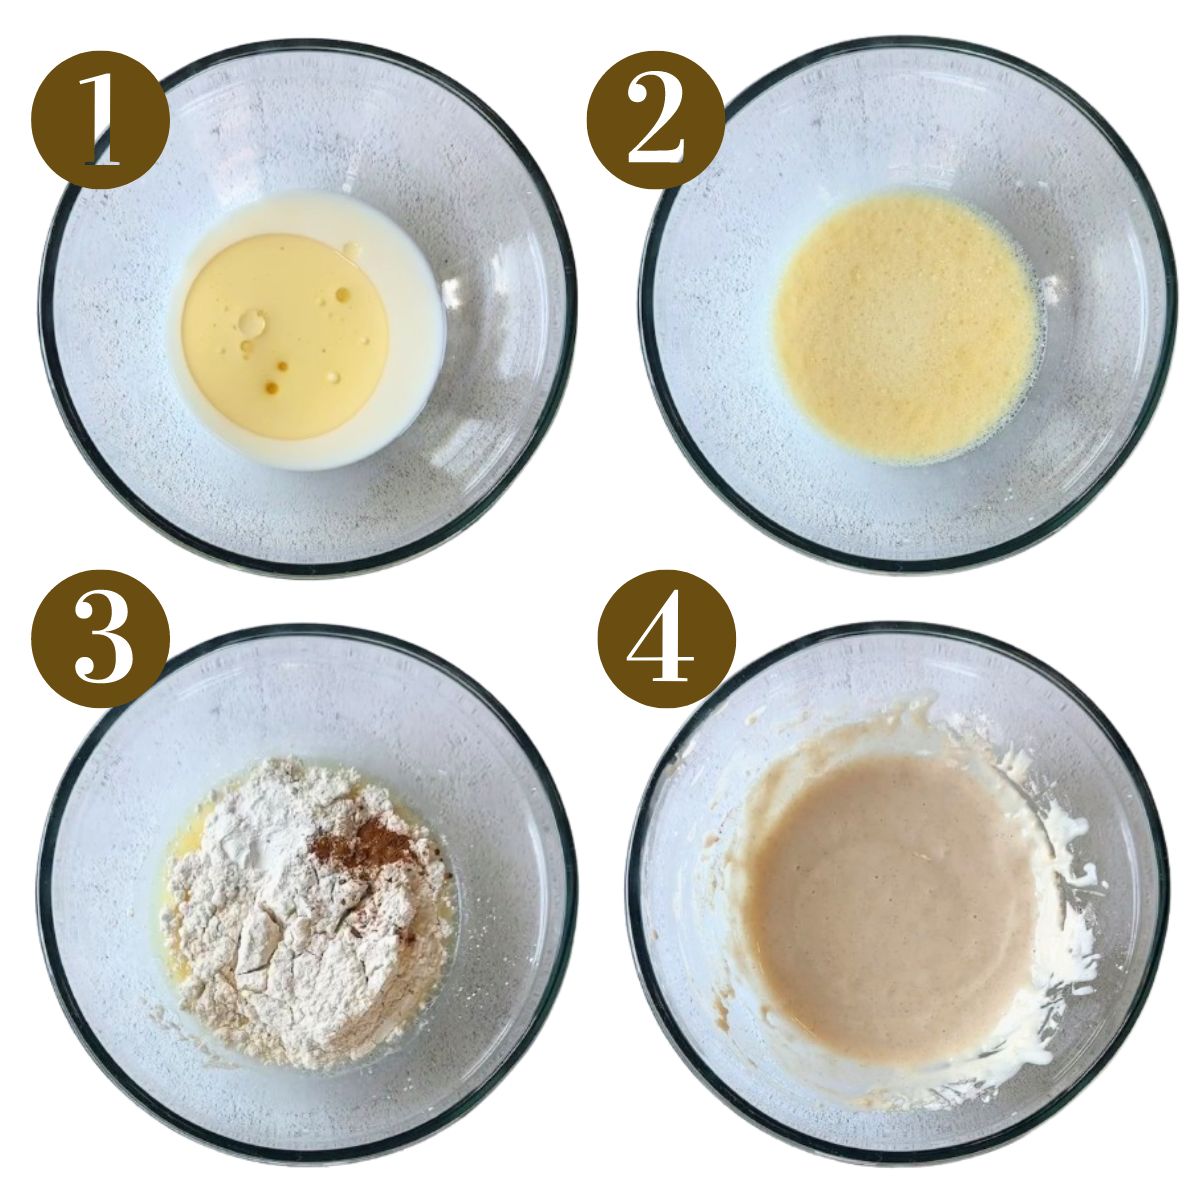 Steps to make dipped pancakes with pears.